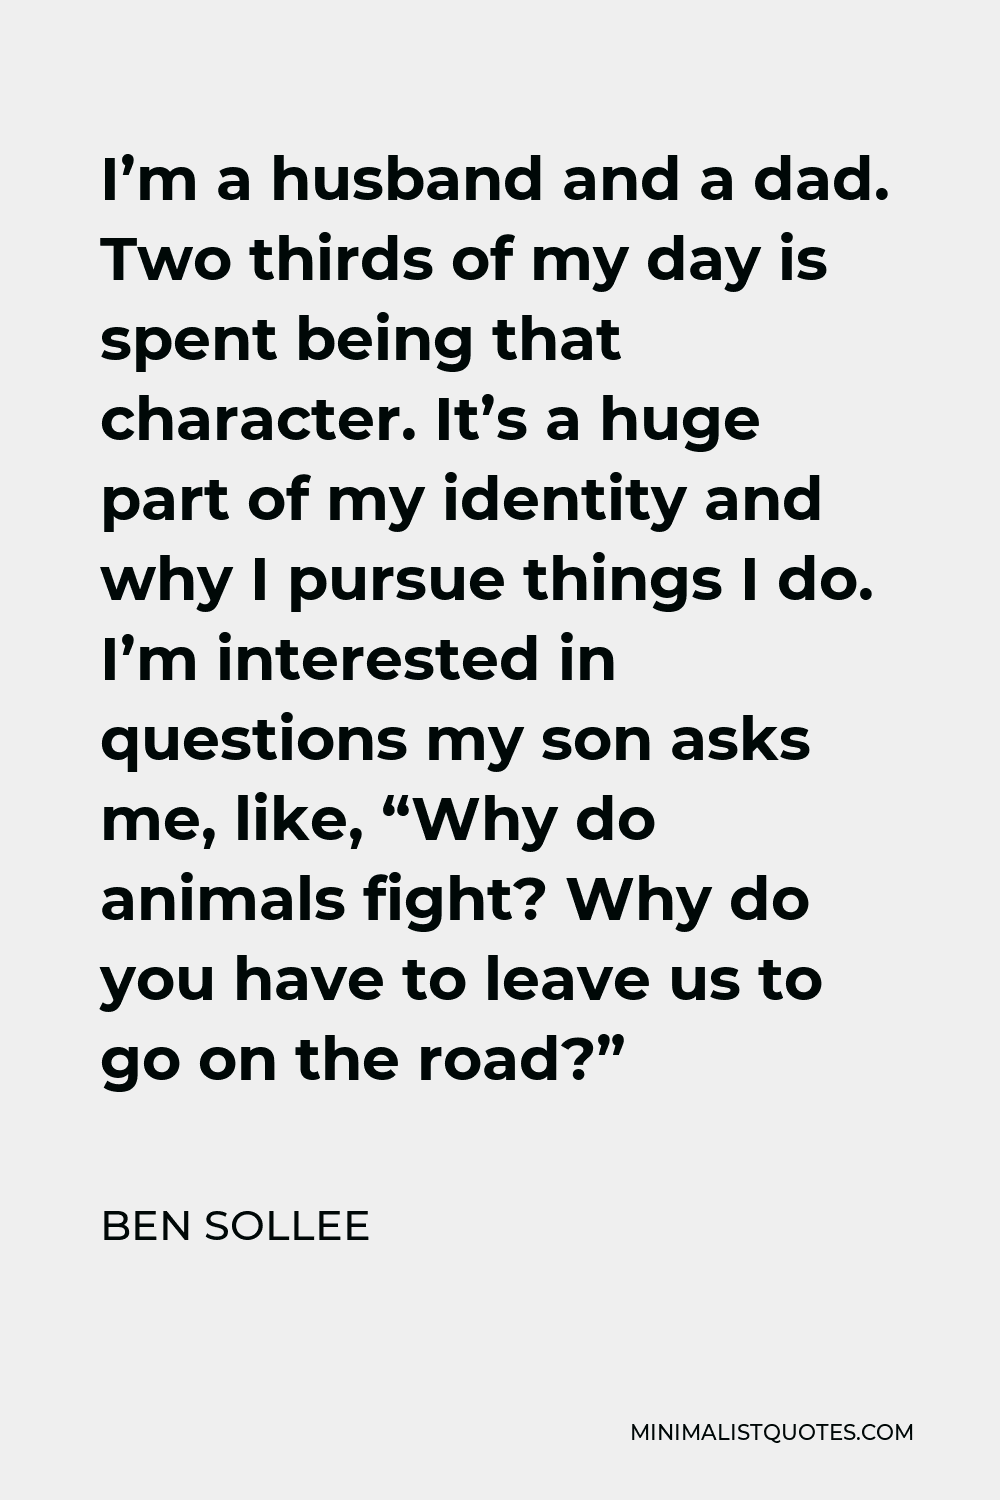 Ben Sollee Quote - I’m a husband and a dad. Two thirds of my day is spent being that character. It’s a huge part of my identity and why I pursue things I do. I’m interested in questions my son asks me, like, “Why do animals fight? Why do you have to leave us to go on the road?”